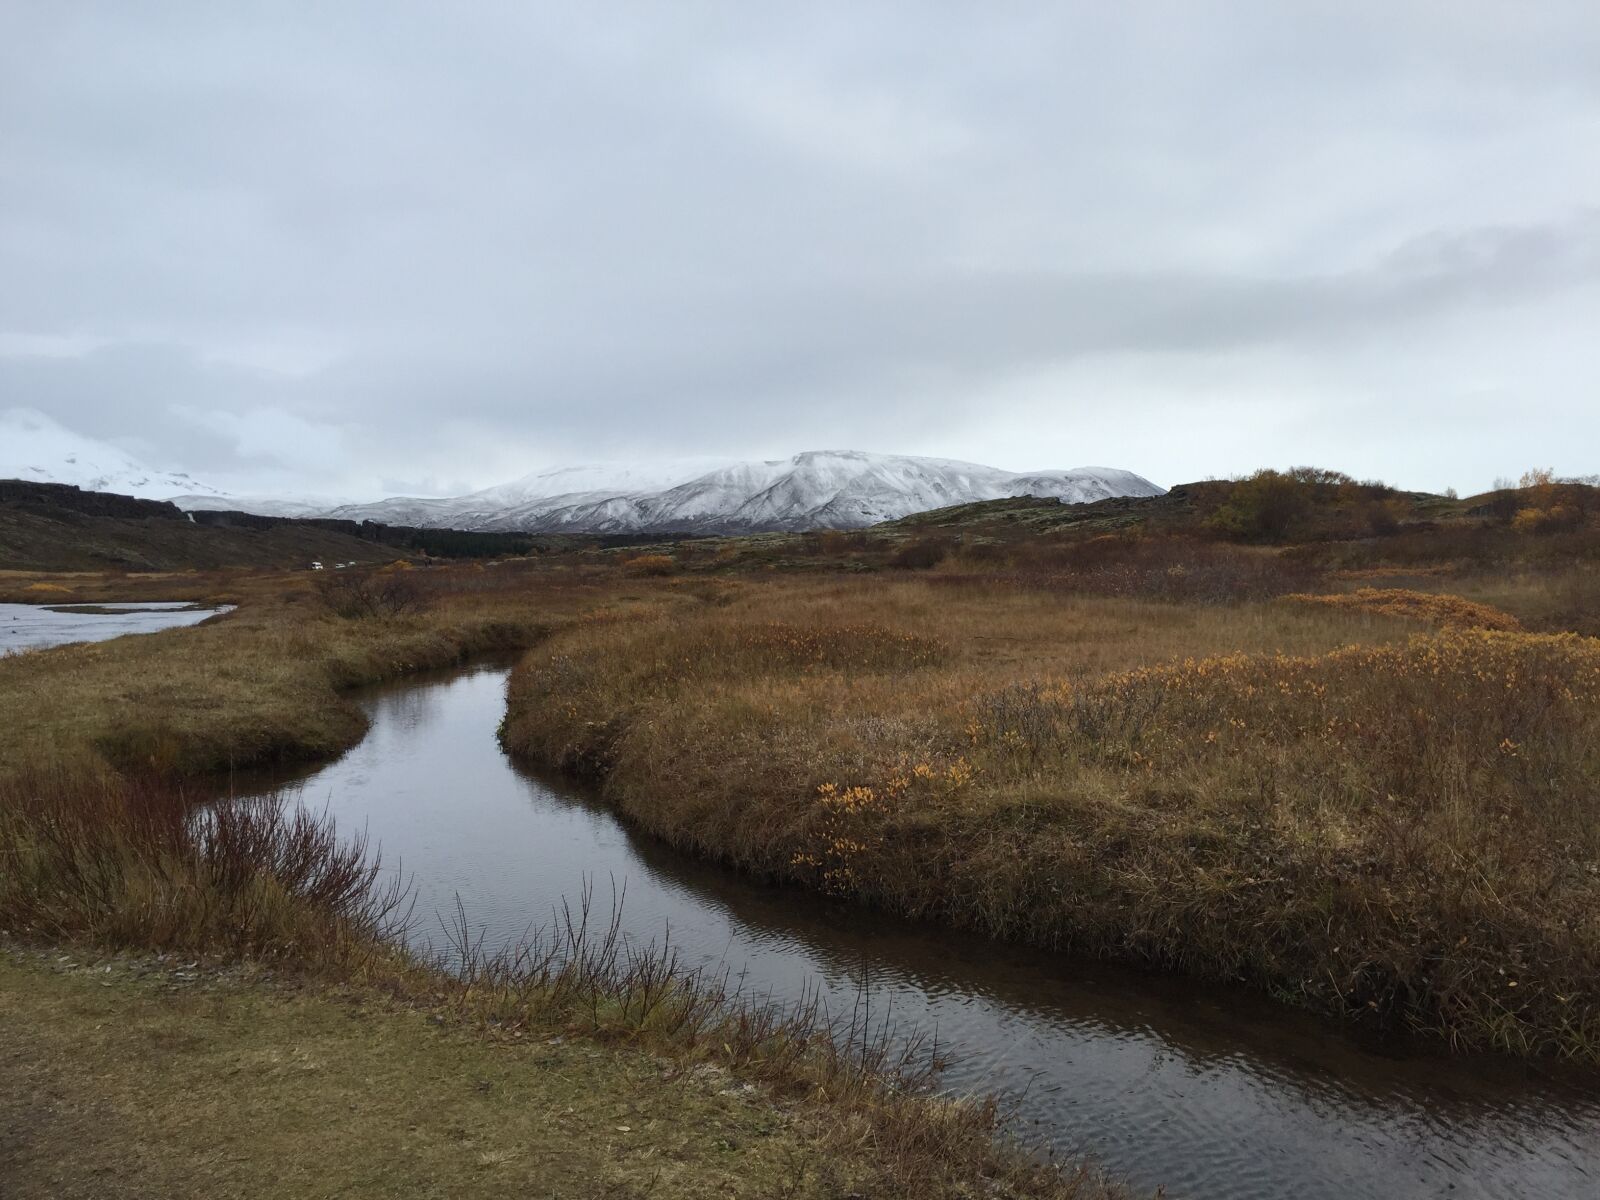 Apple iPhone 6 sample photo. Iceland, the nature of photography